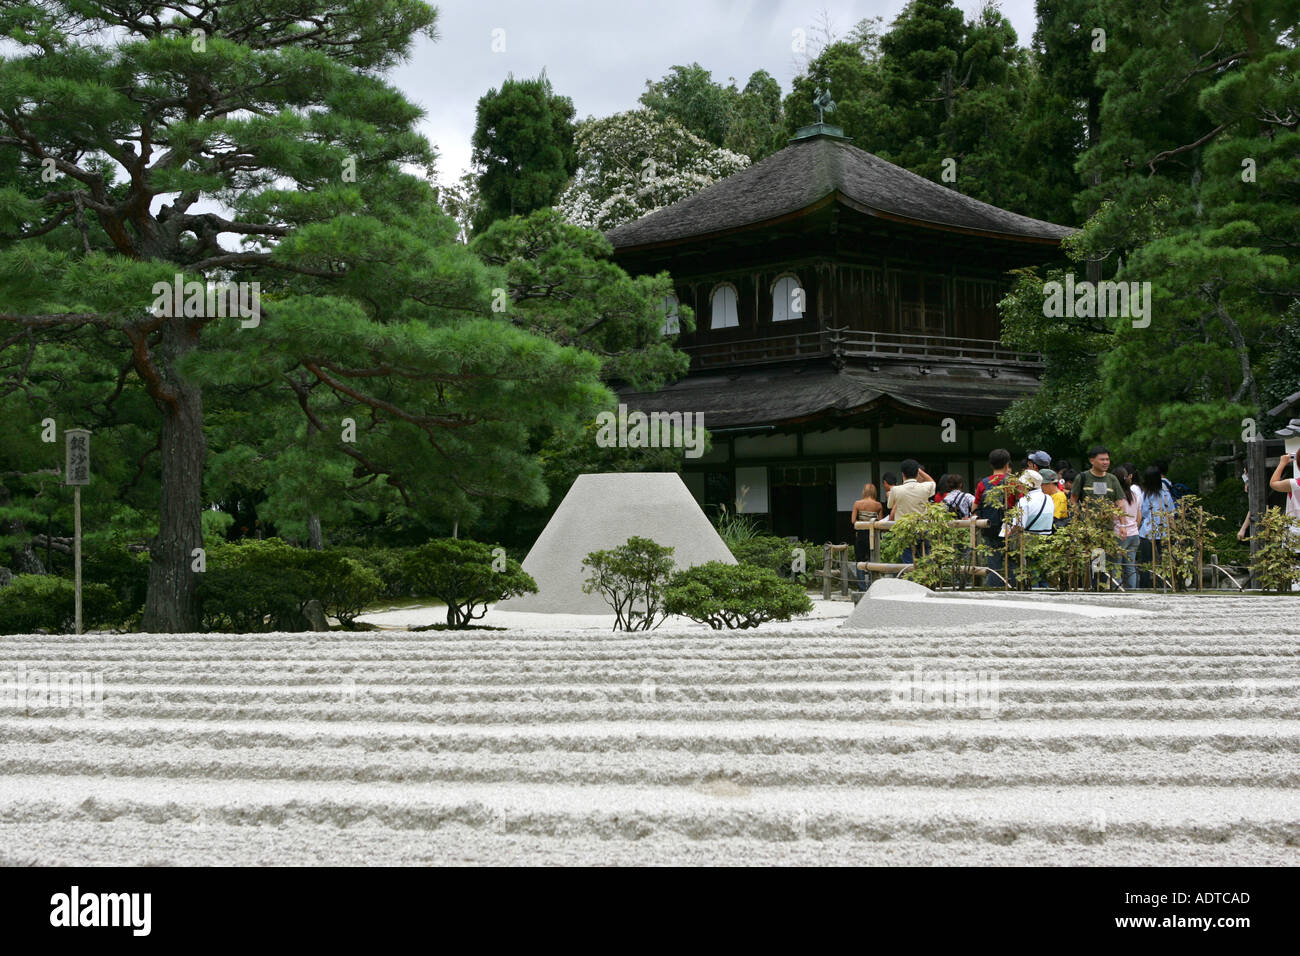 The main wooden temple building at the Silver Zen garden in ancient Kyoto Kansai region Japan Asia Stock Photo